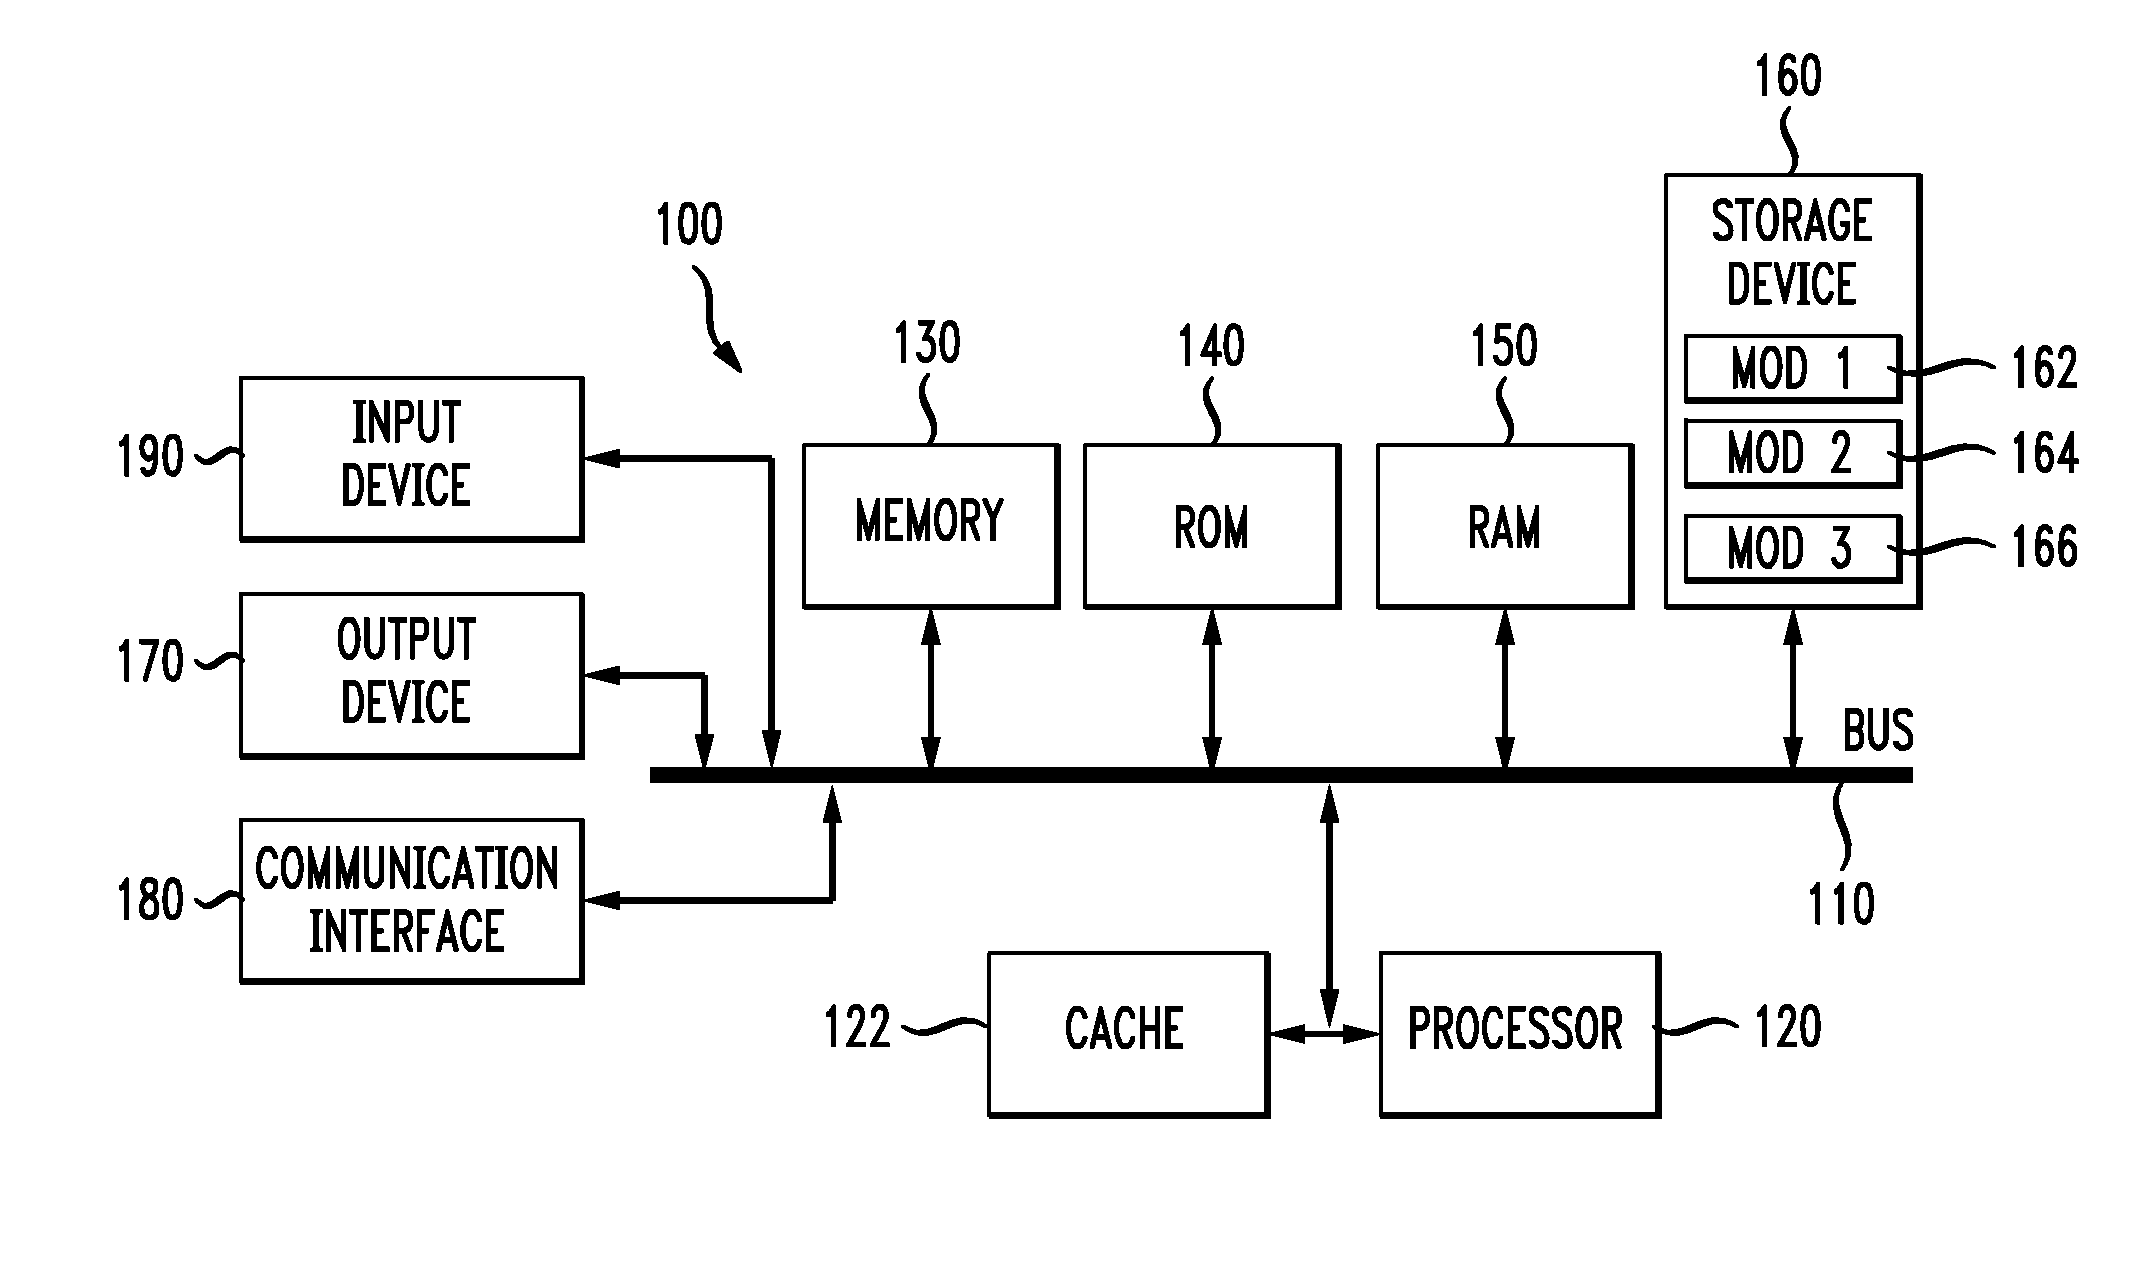 System and method for using a financial condition algorithm to process purchases and advertisements